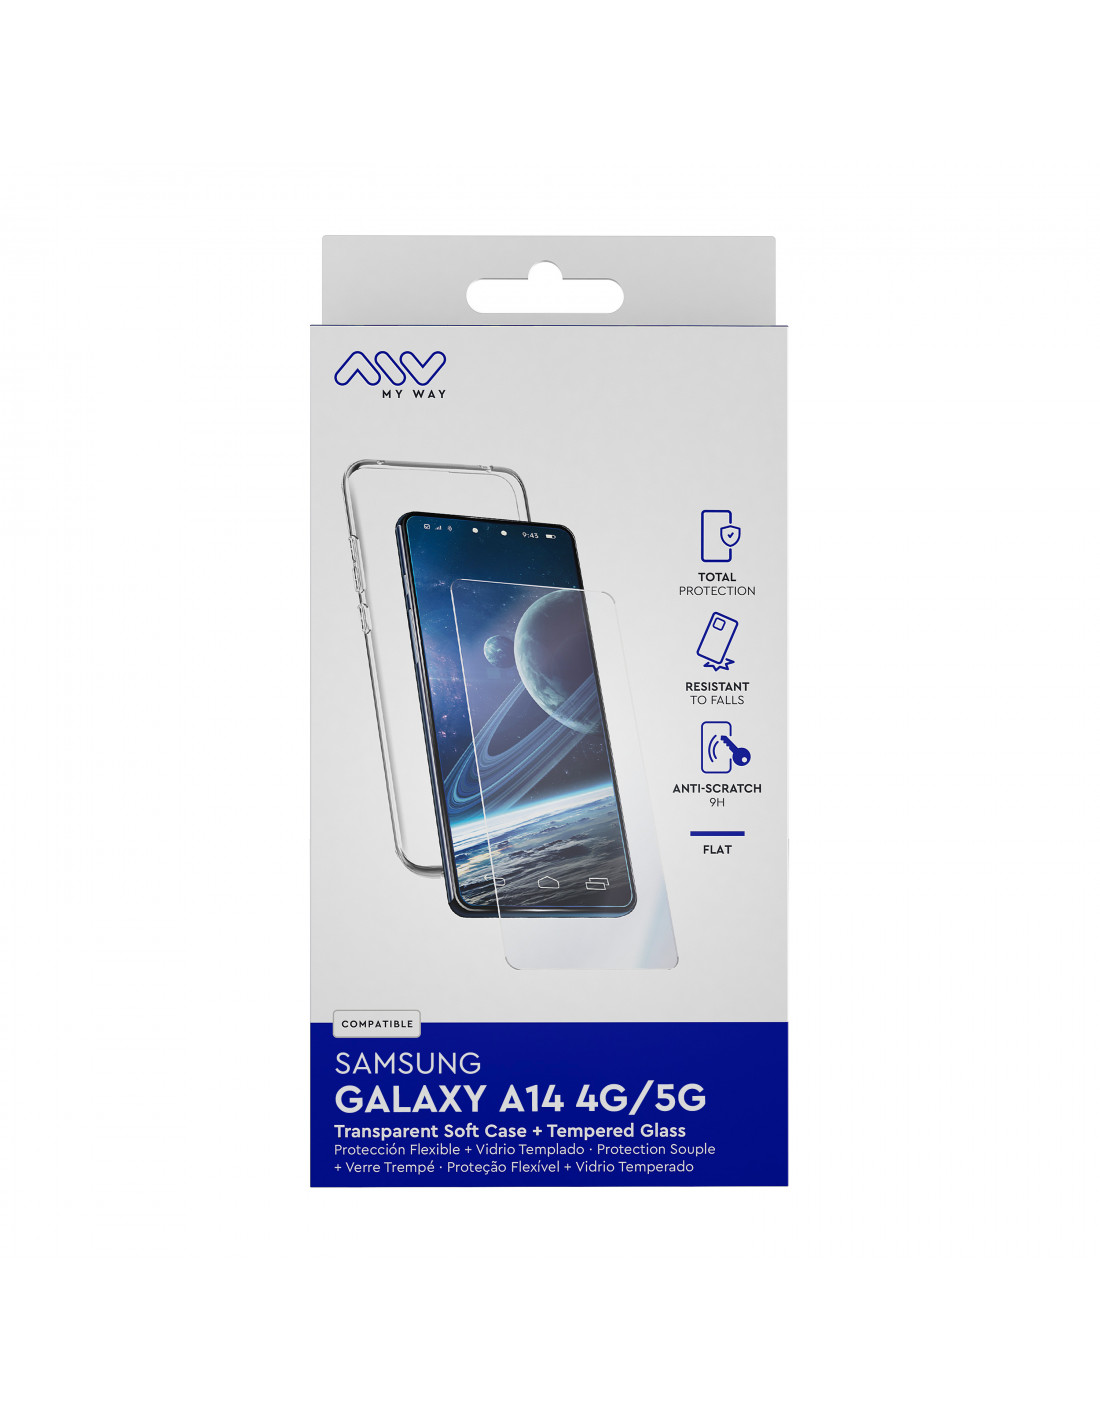 MyWay PACK 2 VERRES TREMPES SAMSUNG GALAXY A25 5G